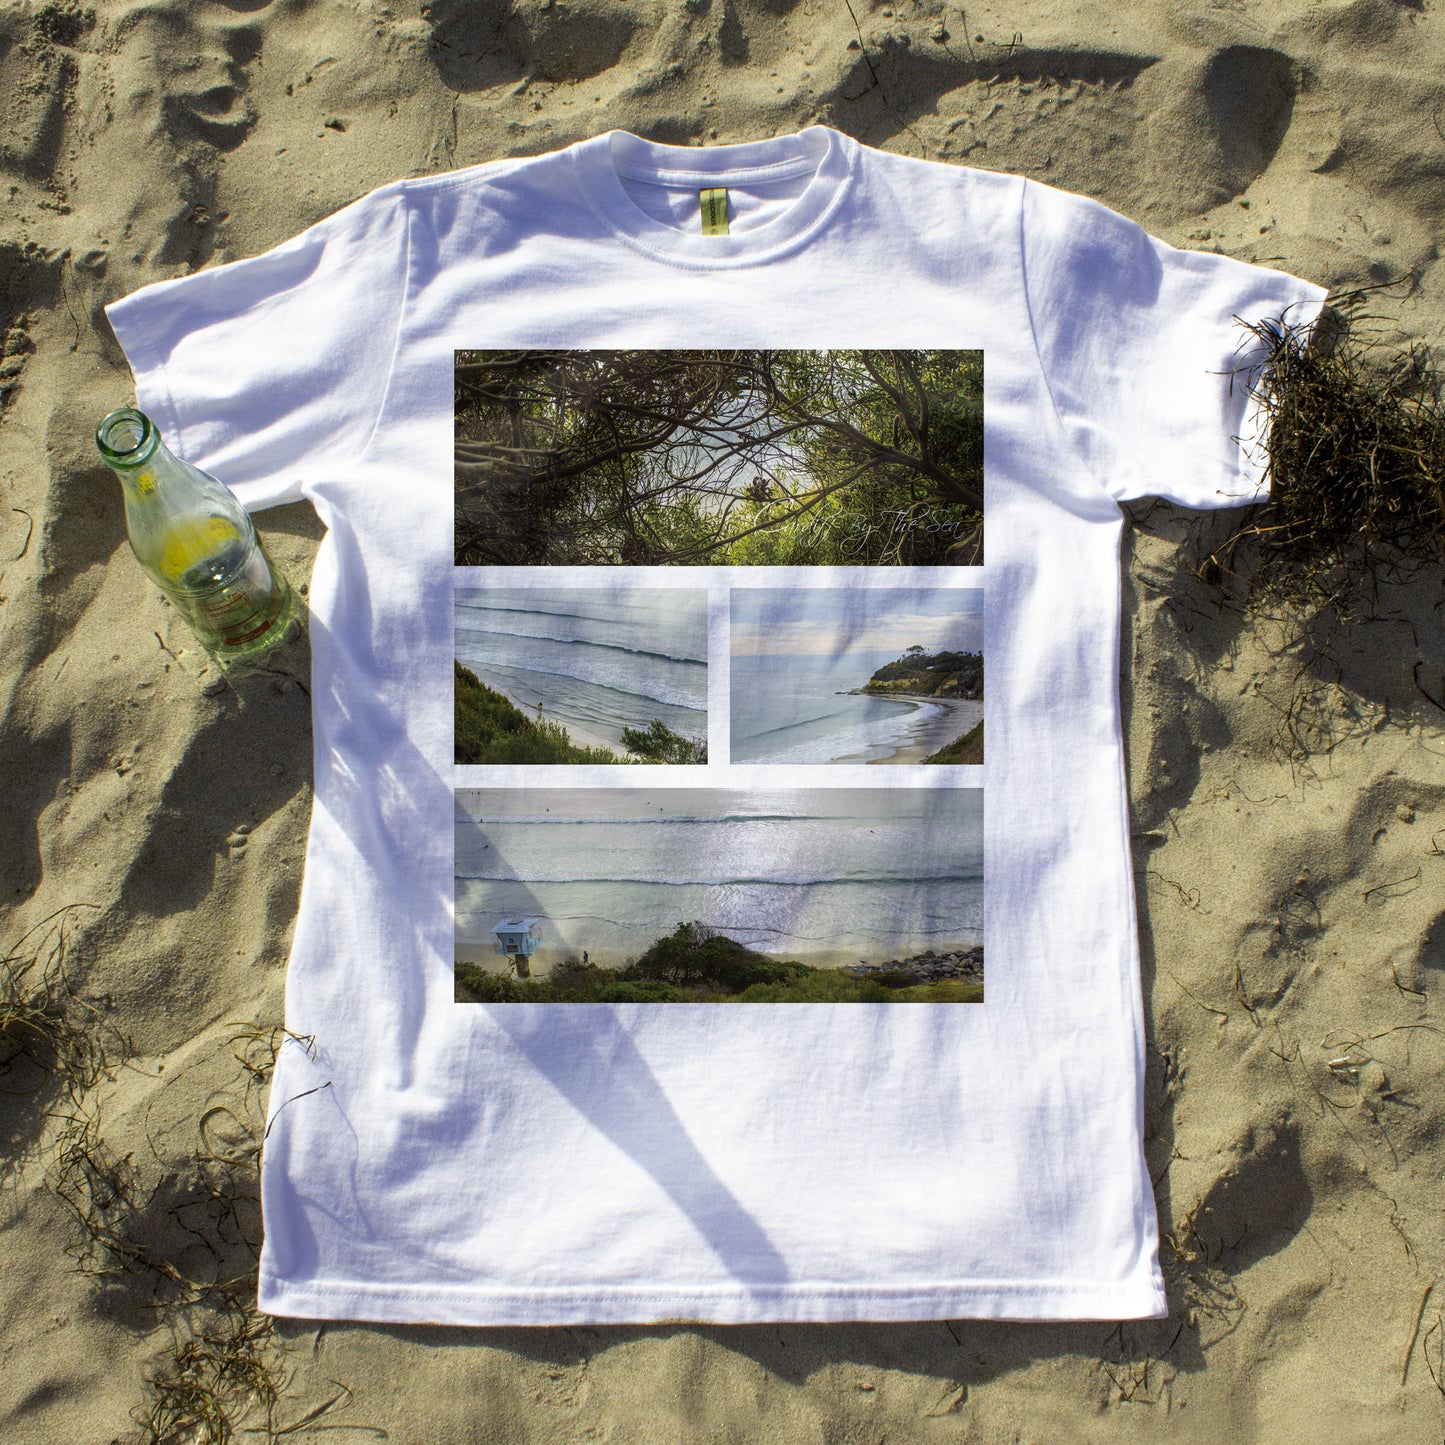 Le t-shirt bio Cardiff-By-The-Sea